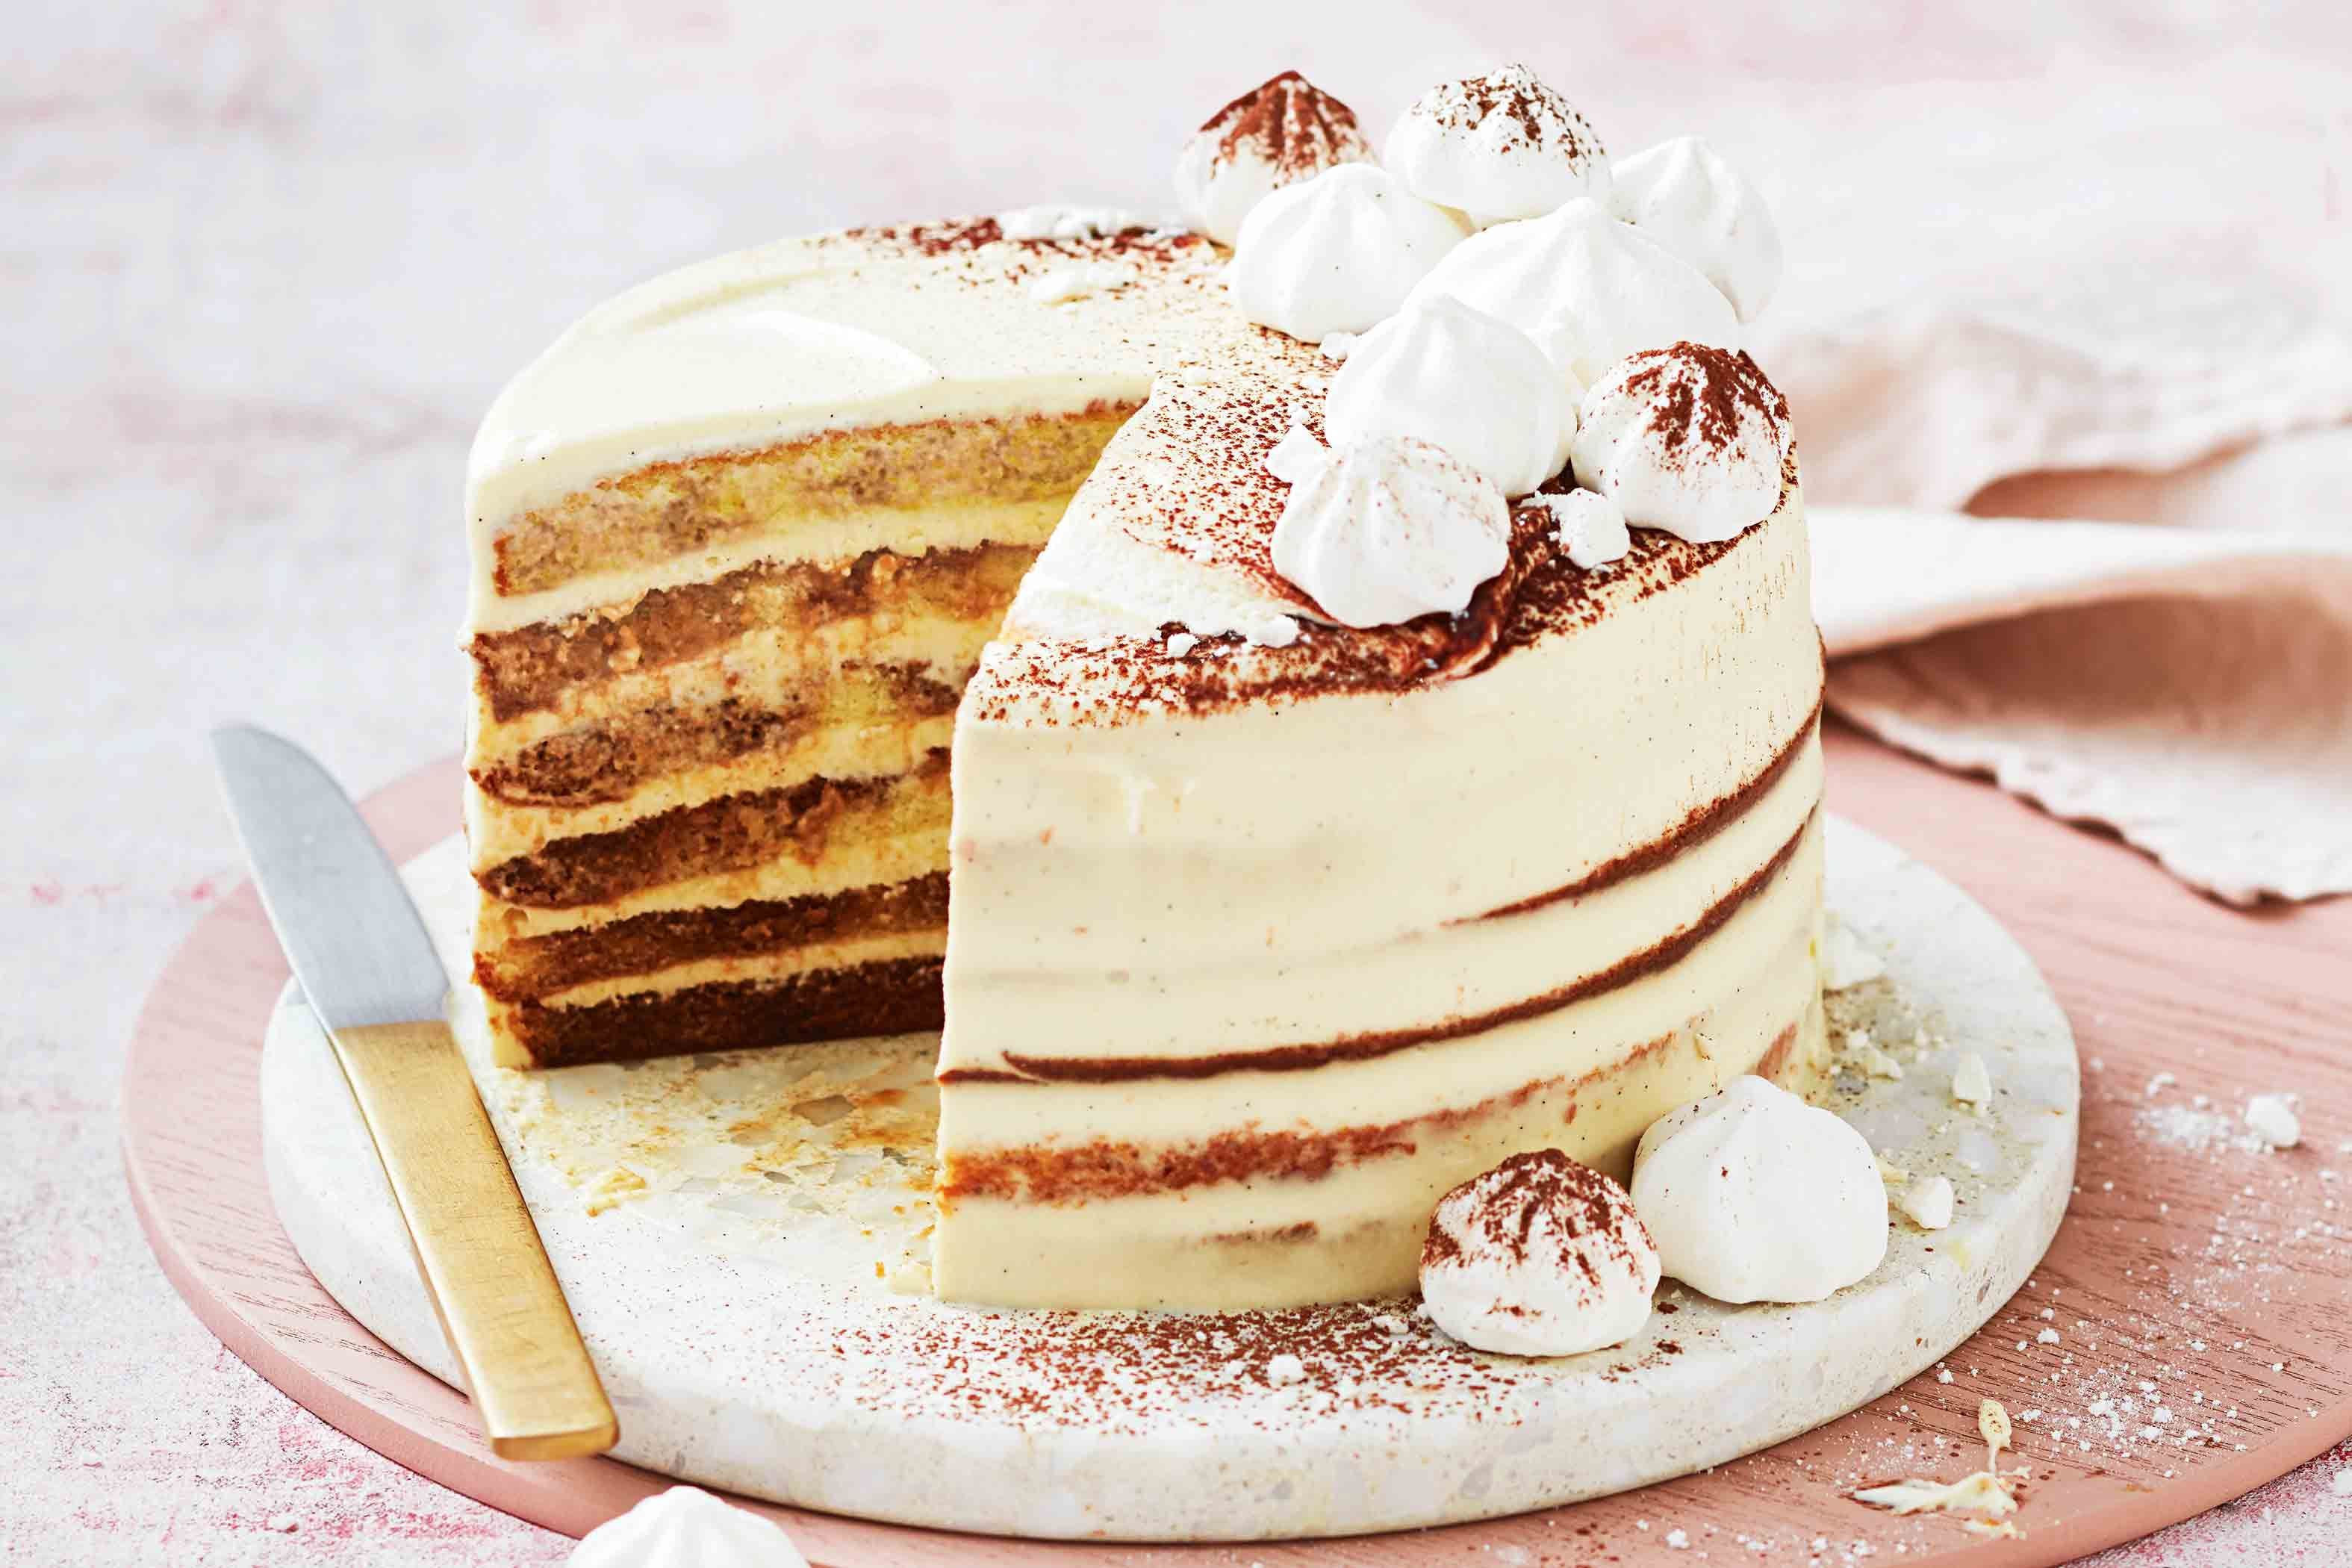 relax-its-just-a-layer-cake